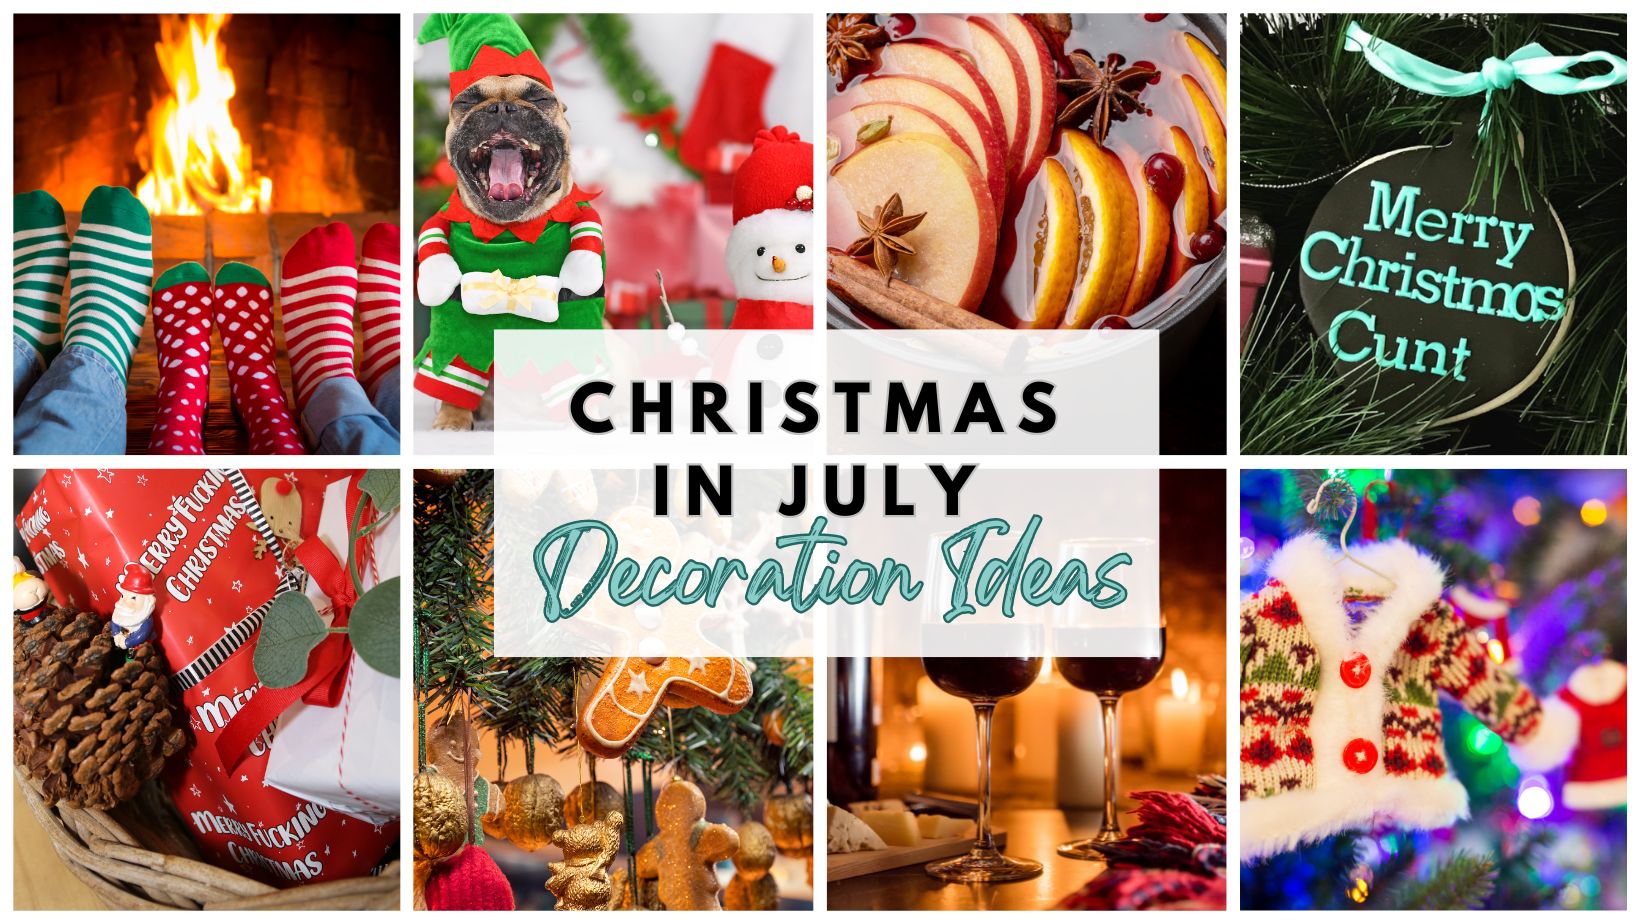 Decorating Your Home for Christmas in July: A Lazy Guide for a Festive Winter Wonderland